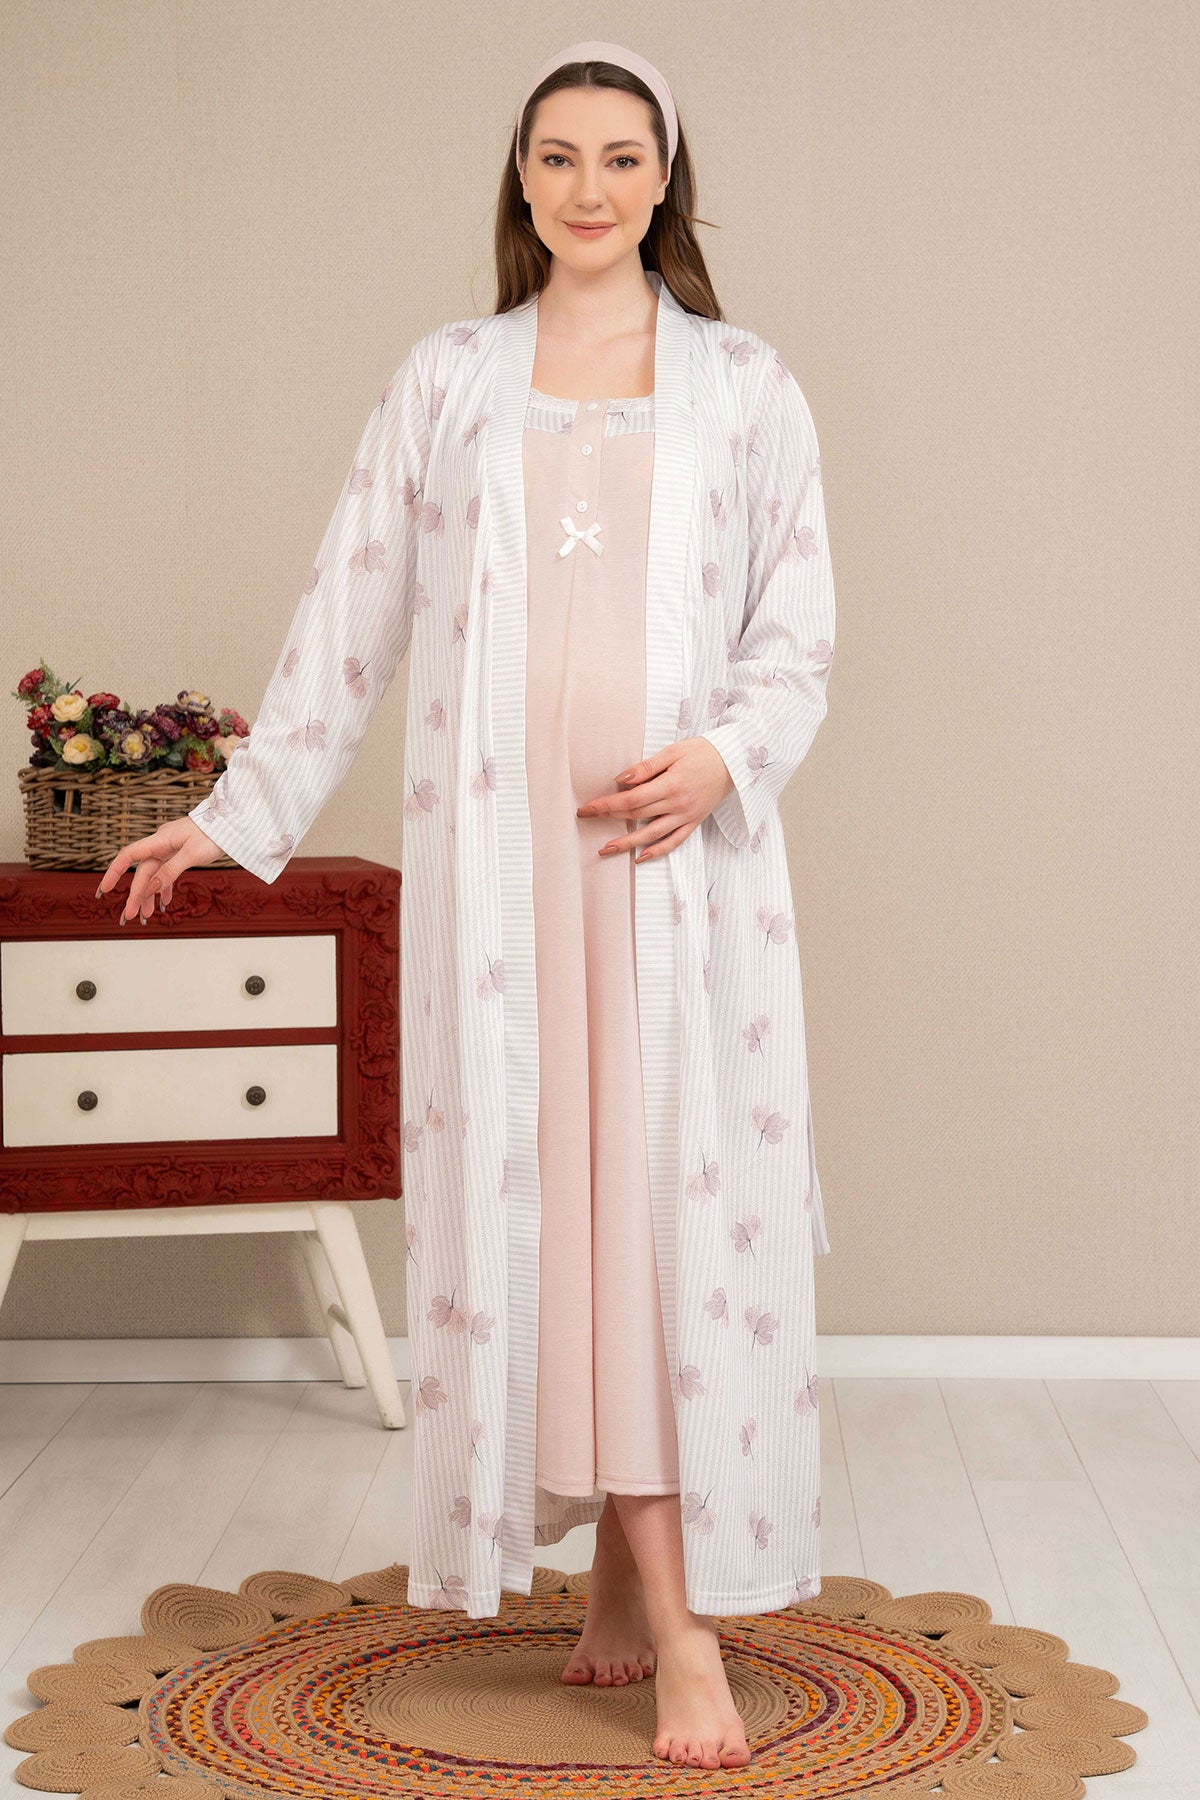 Strap Maternity & Nursing Nightgown With Flower Pattern Robe Dried Rose - 4522